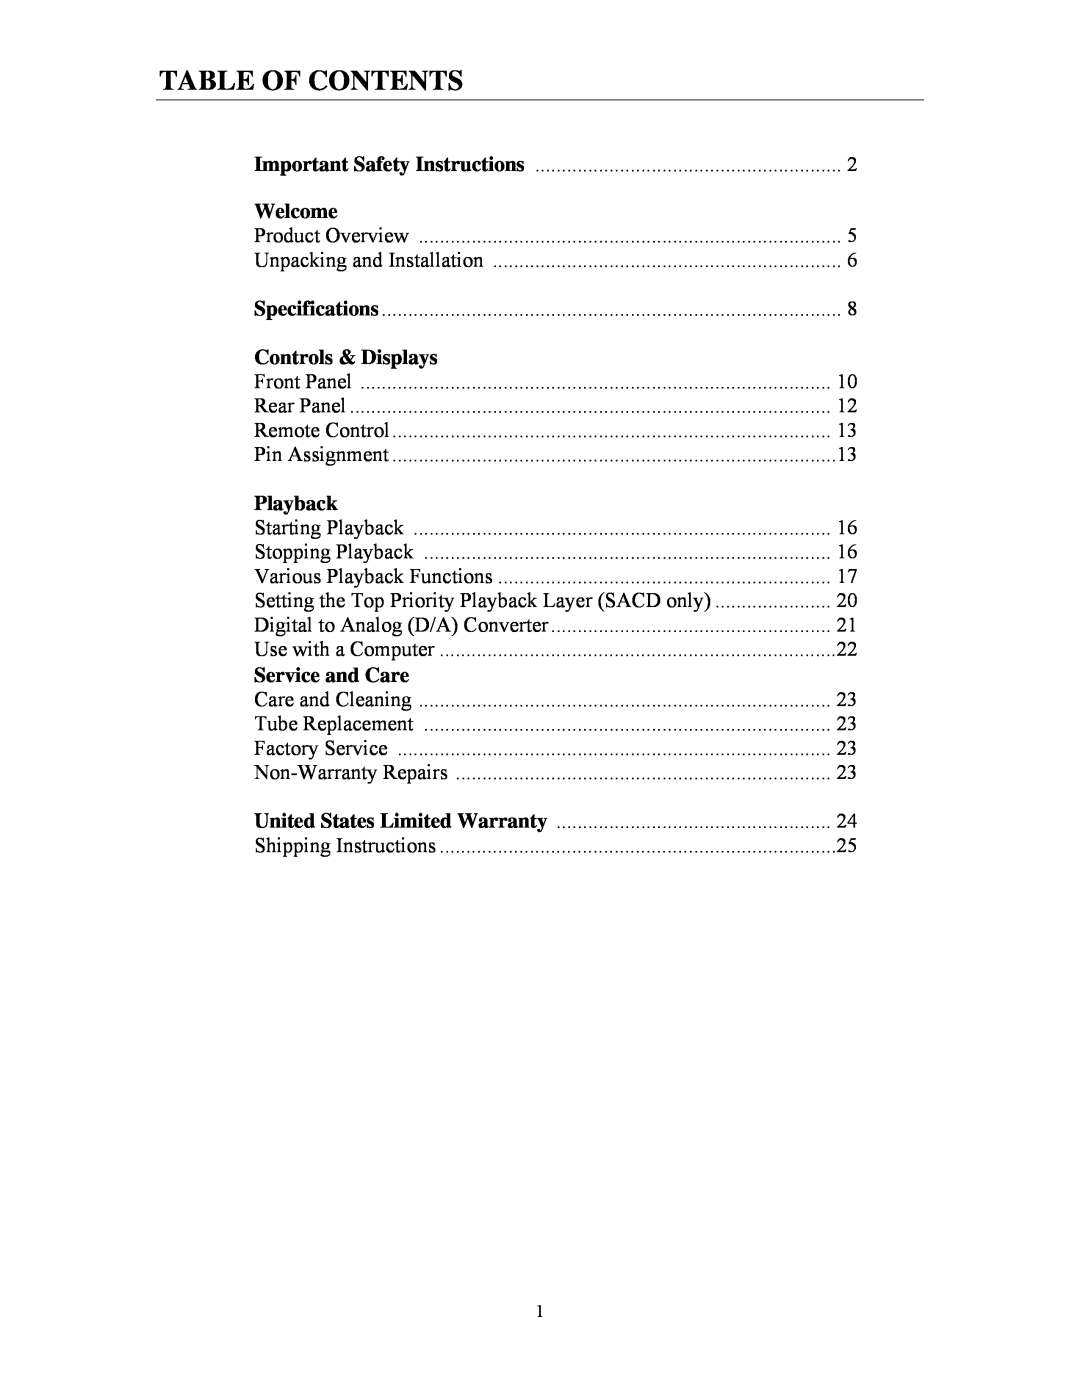 Cary Audio Design CD 303T SACD specifications Table Of Contents, Welcome, Controls & Displays, Playback, Service and Care 